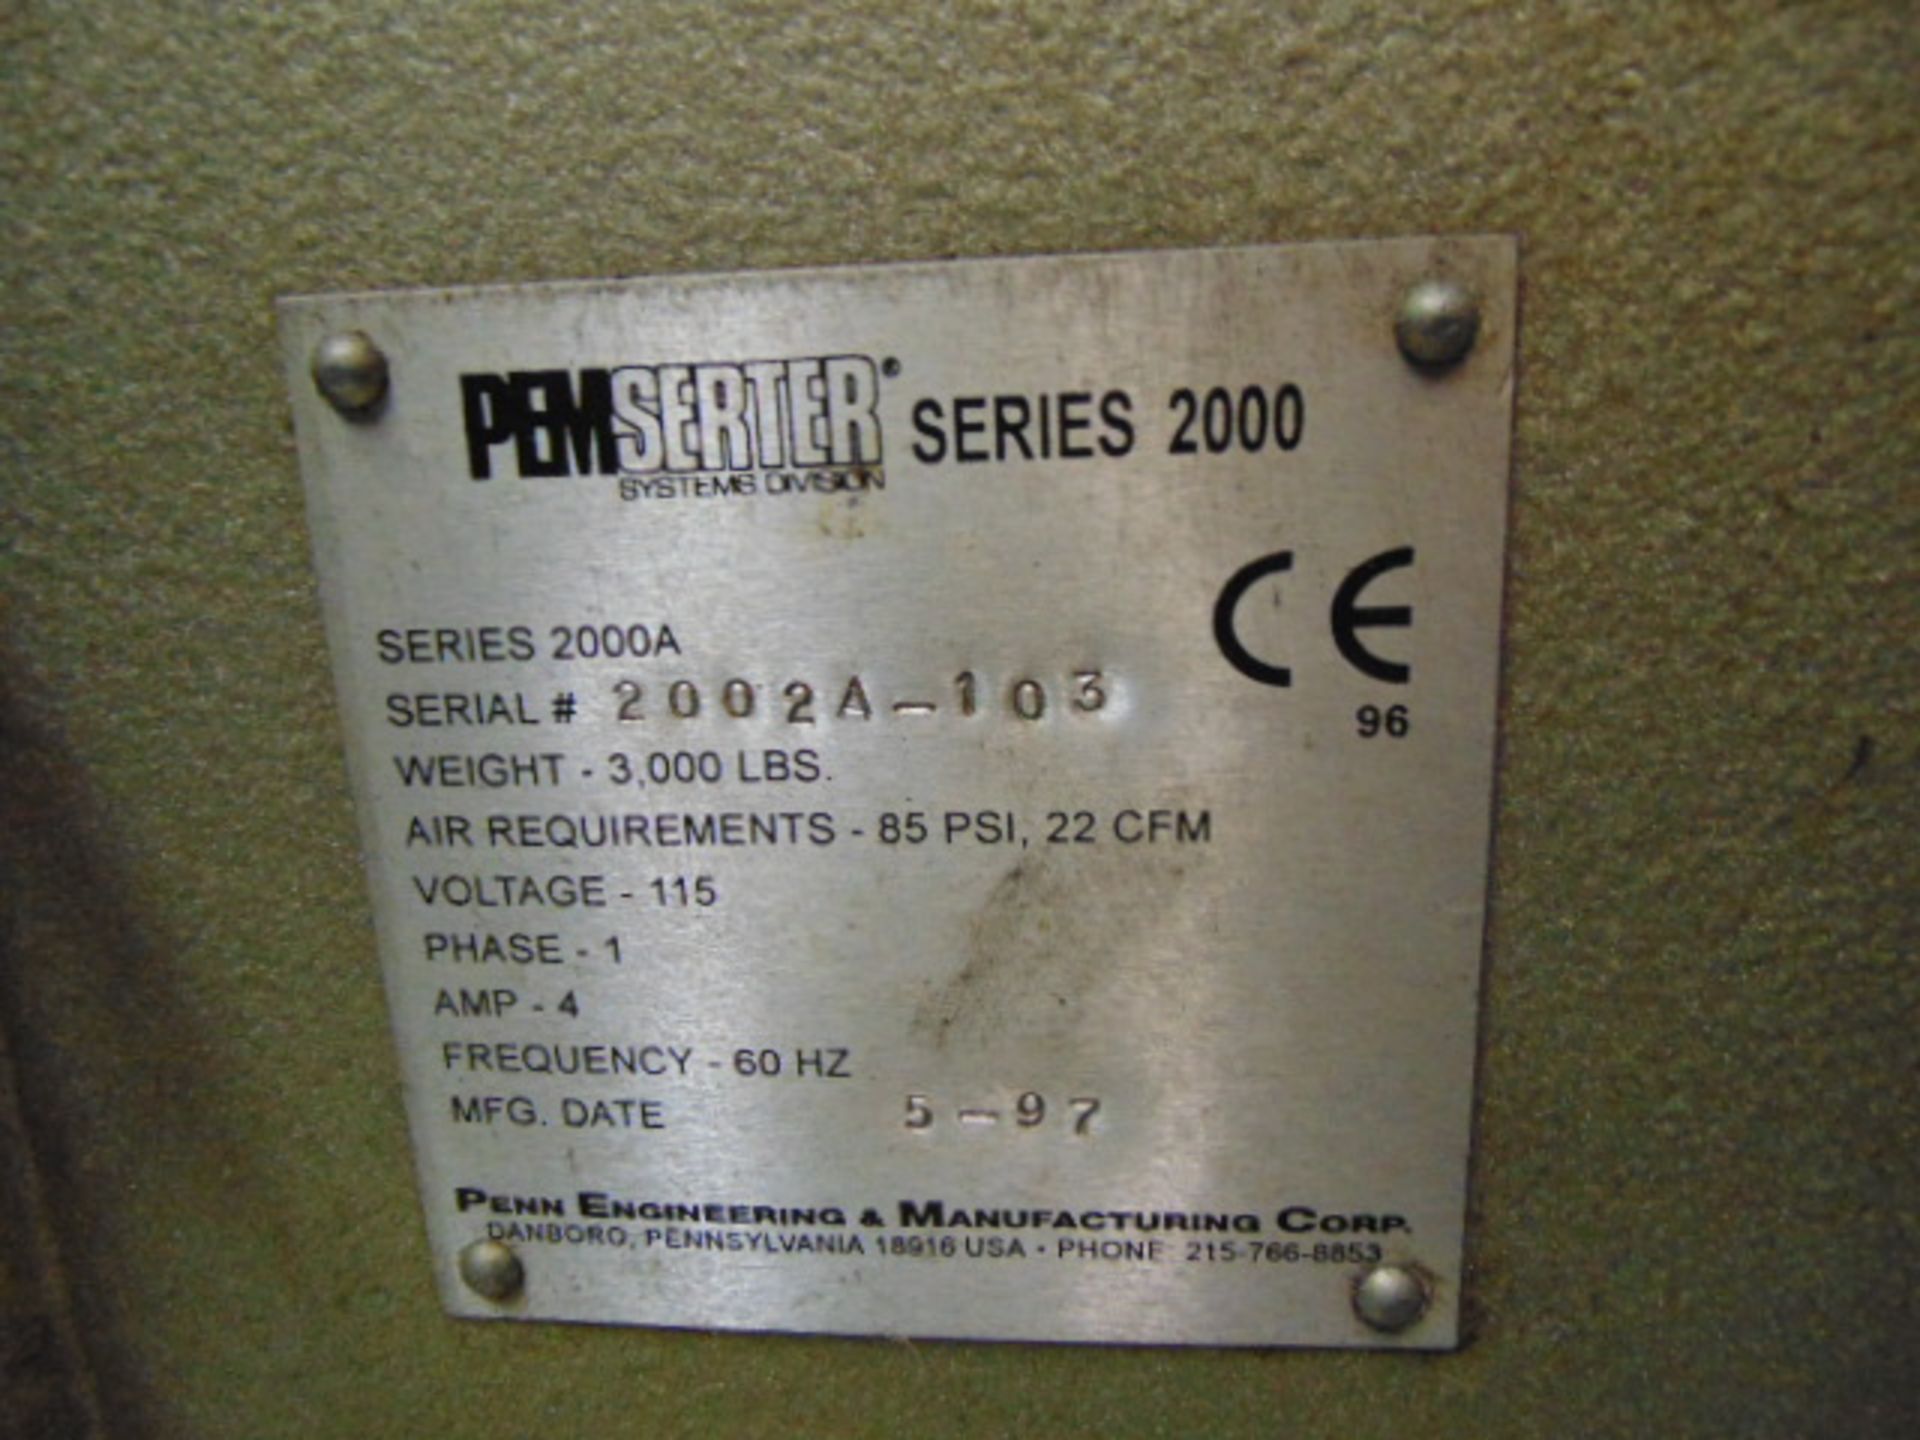 HARDWARE PRESS, PEMSERTER SERIES 2000A, new 1997, vibratory bowl feed, S/N 2002A-103 - Image 6 of 6